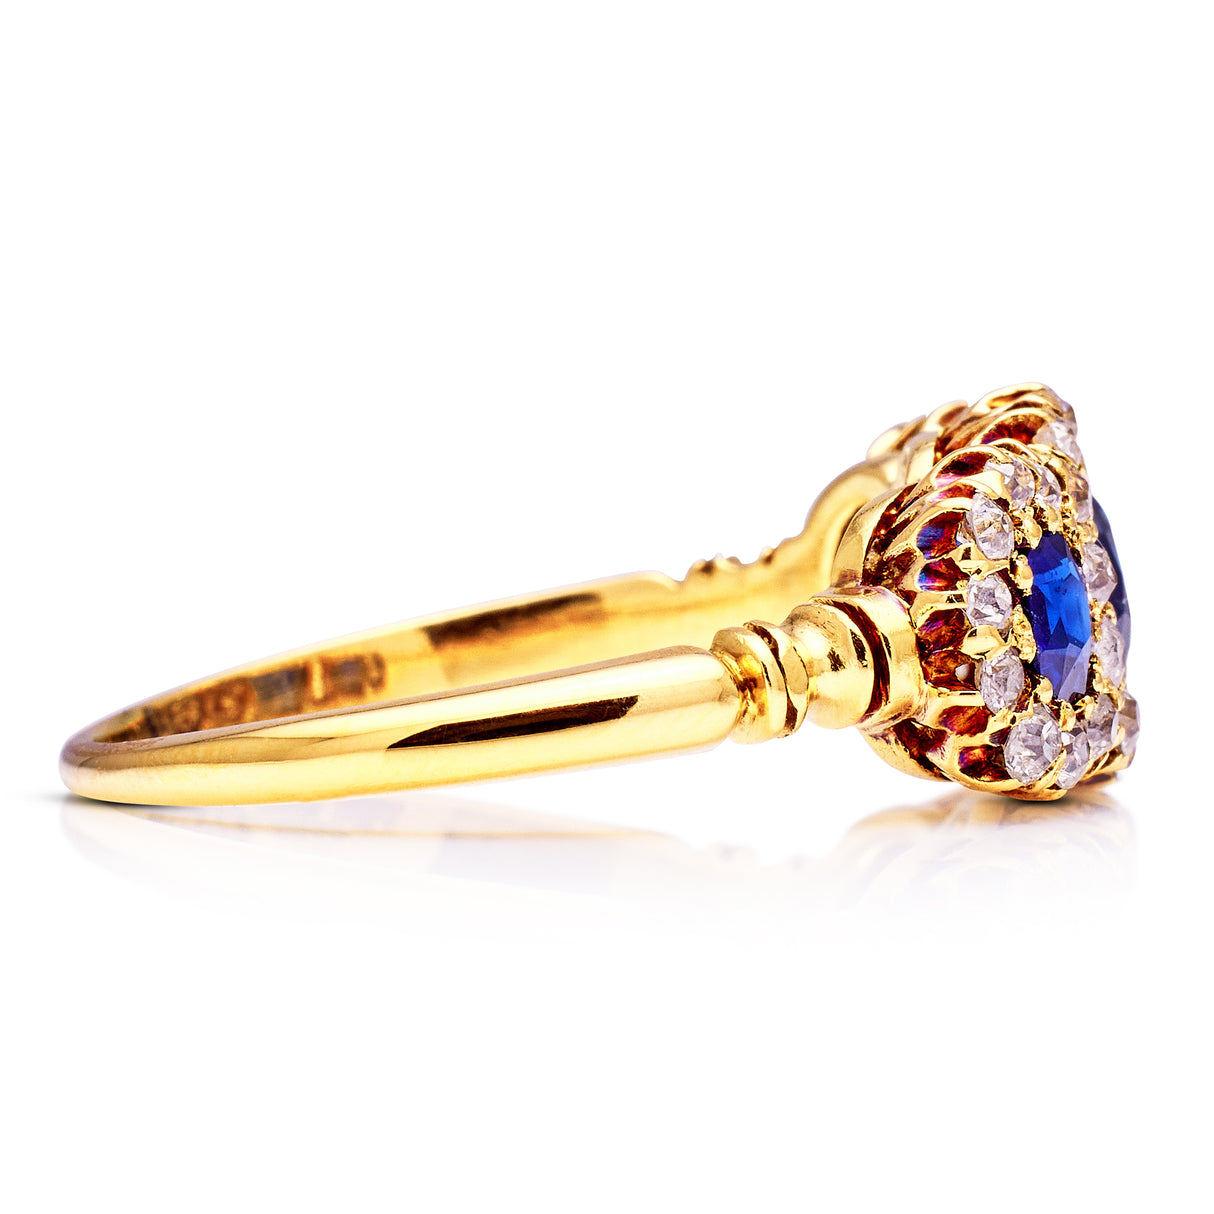 Edwardian, Sapphire and Diamond Triple Cluster Engagement Ring, 18ct Yellow Gold. Side.